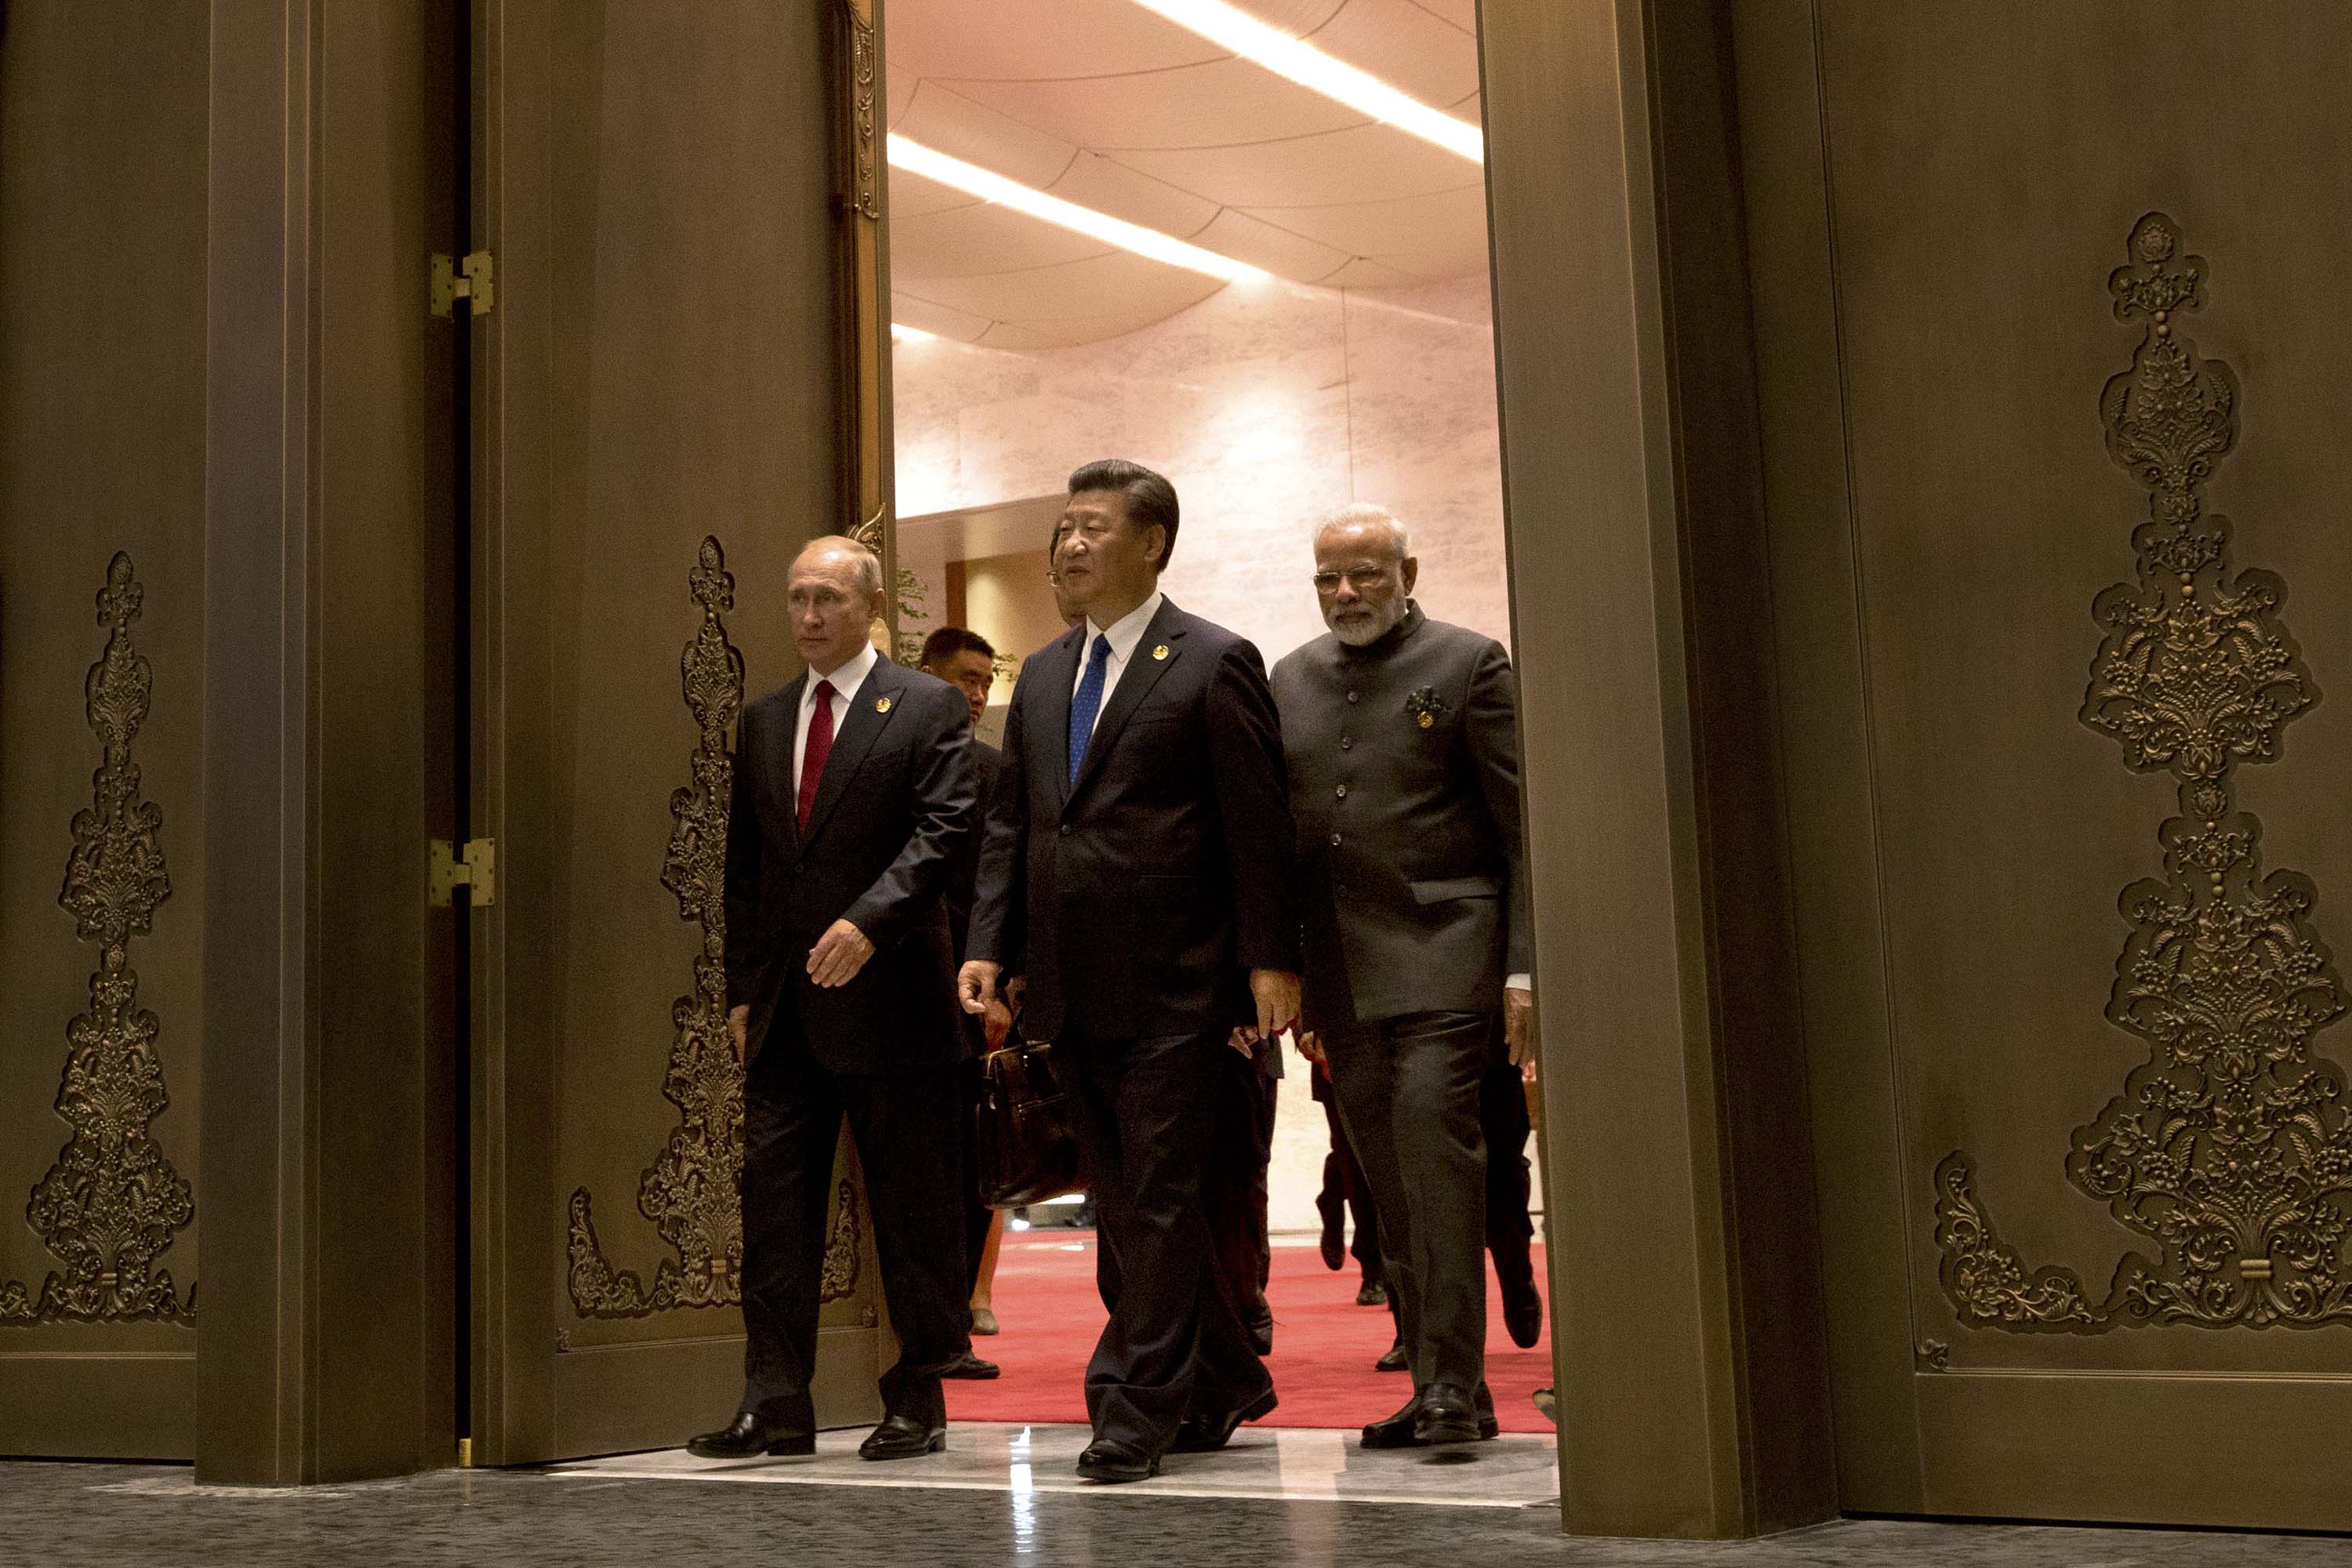 Russian President Vladimir Putin, Chinese President Xi Jinping and Indian Prime Minister Narendra Modi arrive for the 2017 BRICS Summit in Xiamen, China on September 5, 2017.